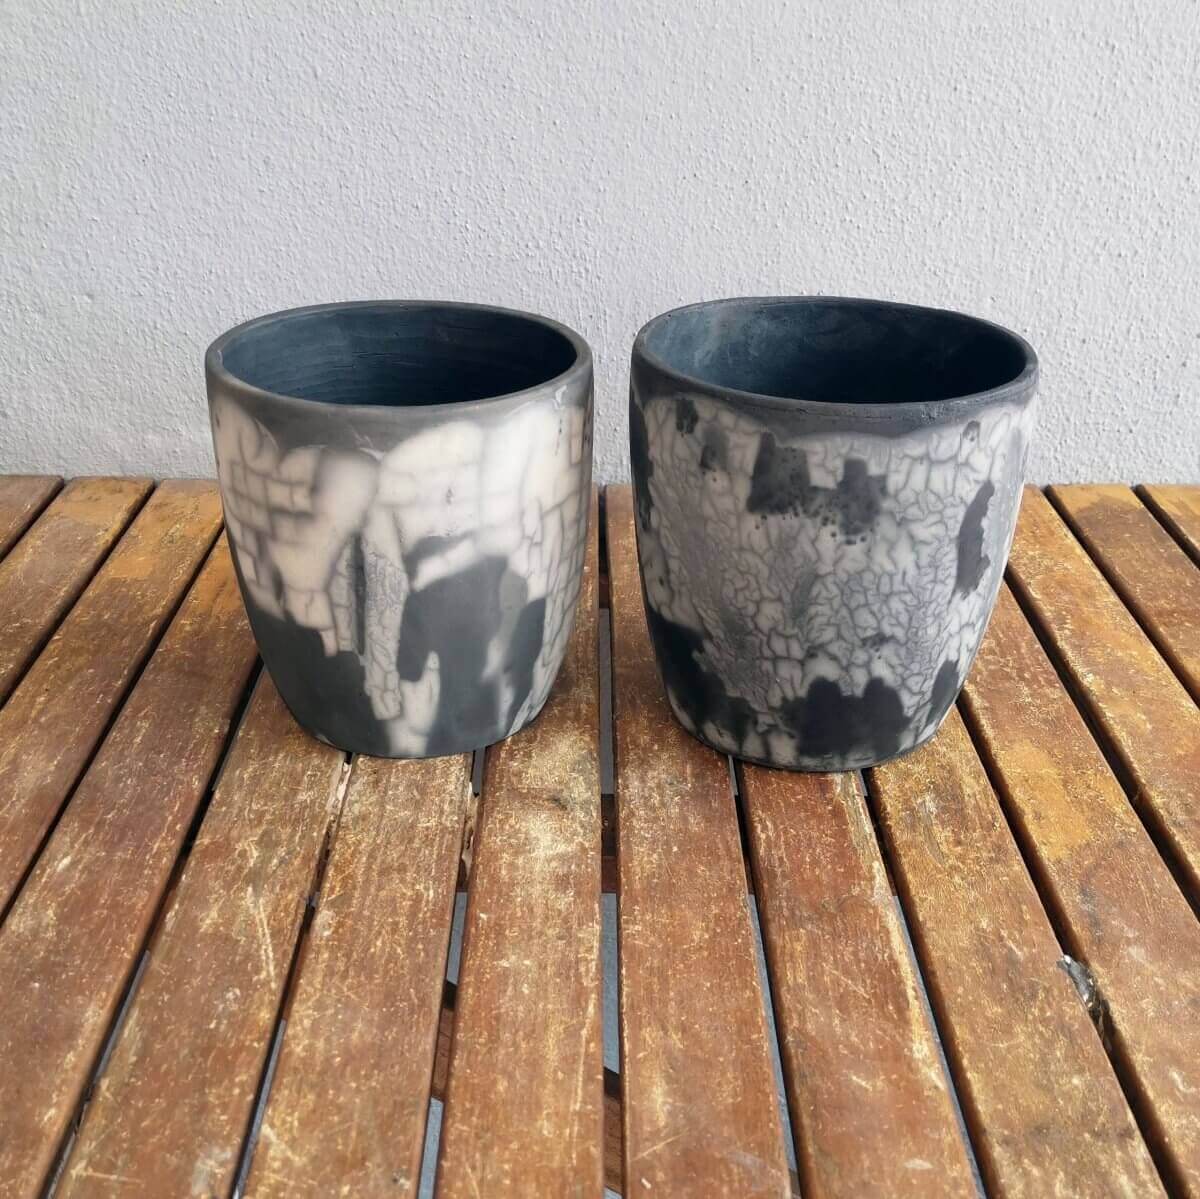 Raku pottery vase ceramic home decor 2 Pack Pottery Pot Seicho - Ceramic Home Decor Raku planter for Indoor plants, cactus, and succulents - handmade gift for her